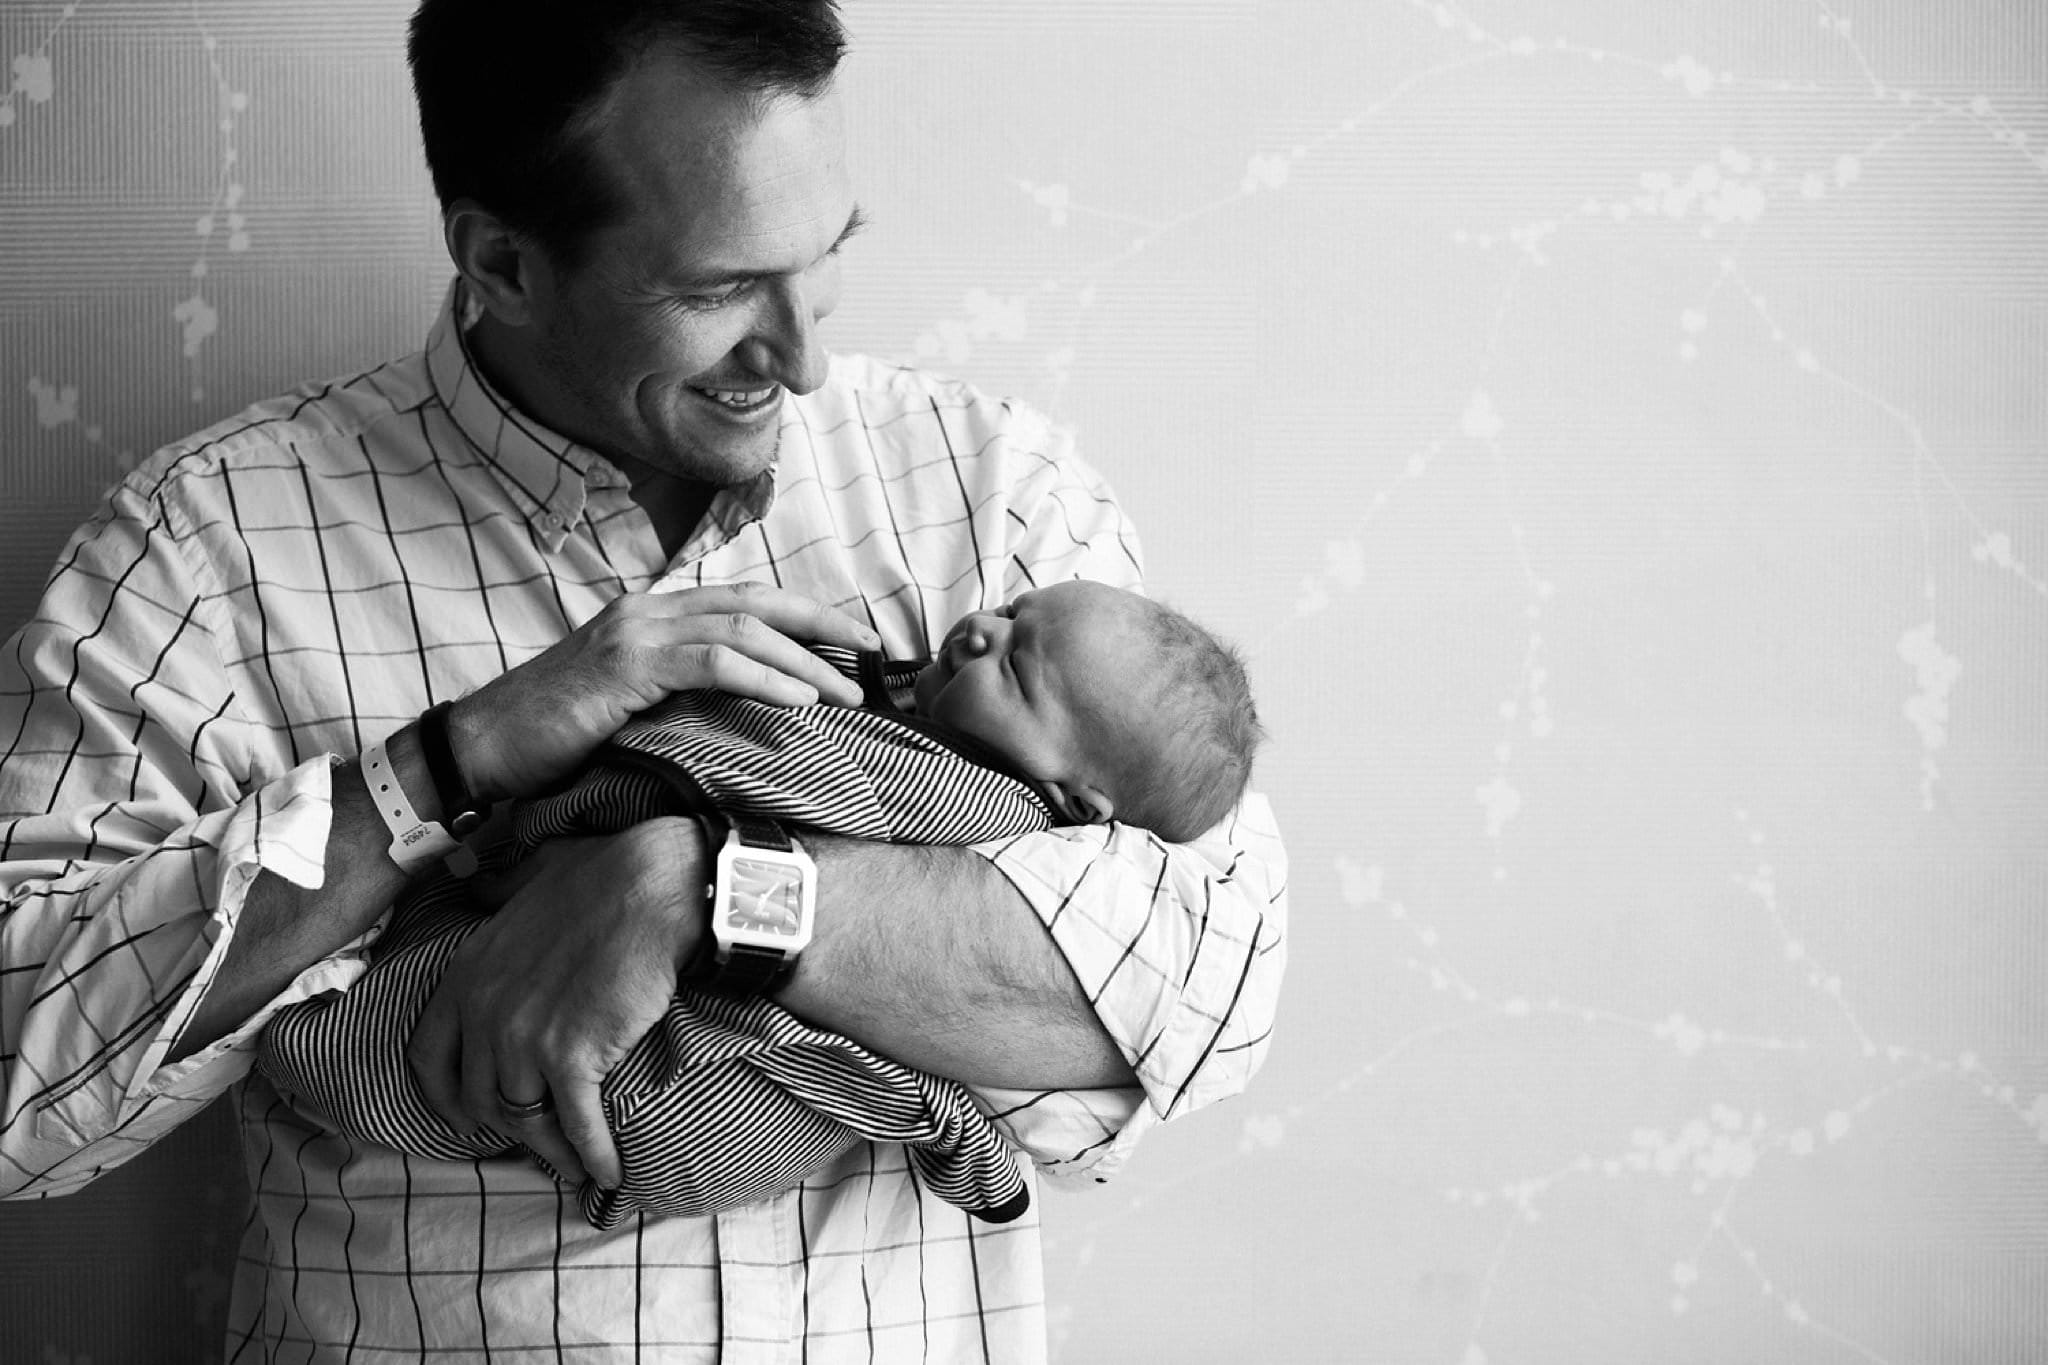 father and son fresh 48 hospital photography